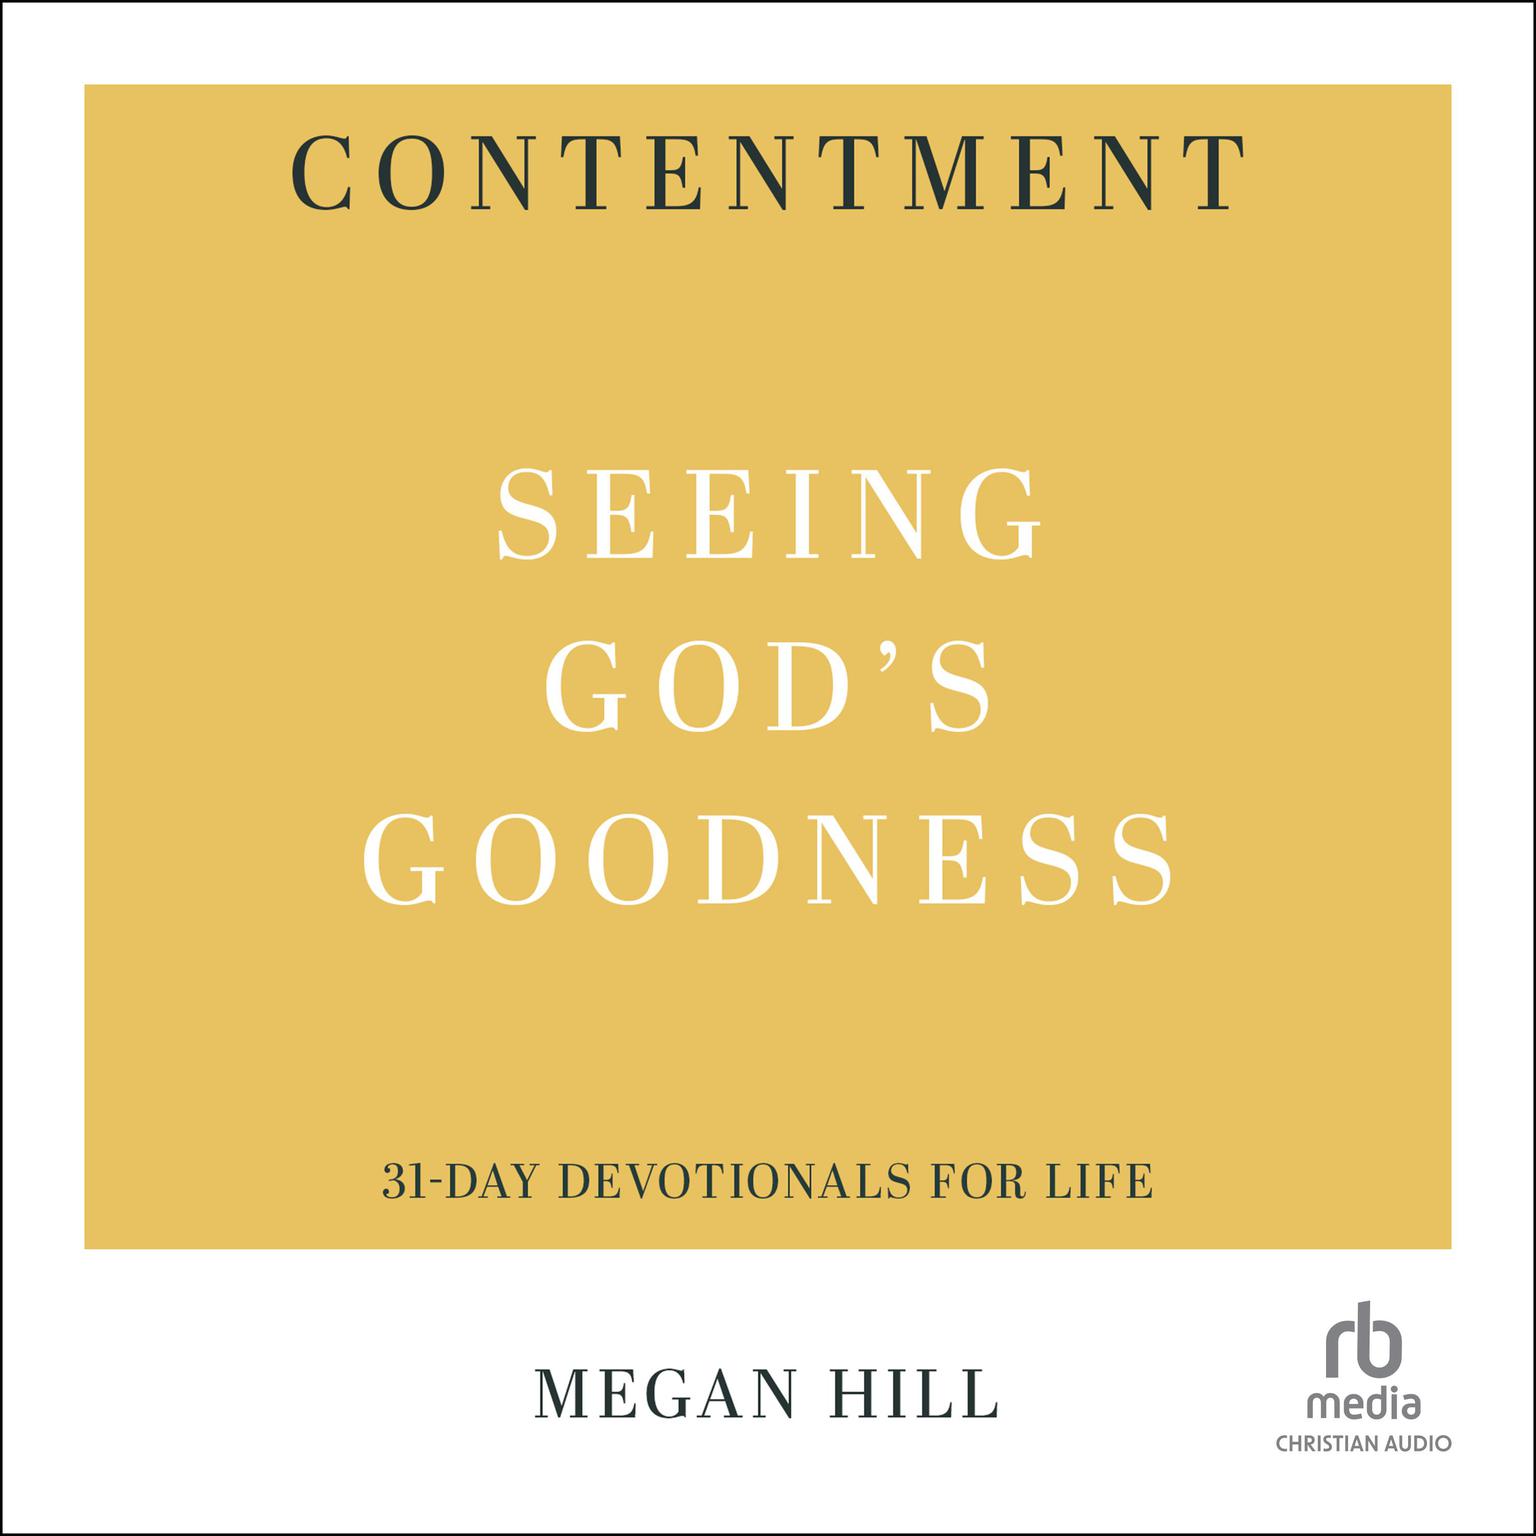 Contentment: Seeing Gods Goodness (31-Day Devotionals for Life) Audiobook, by Megan Hill